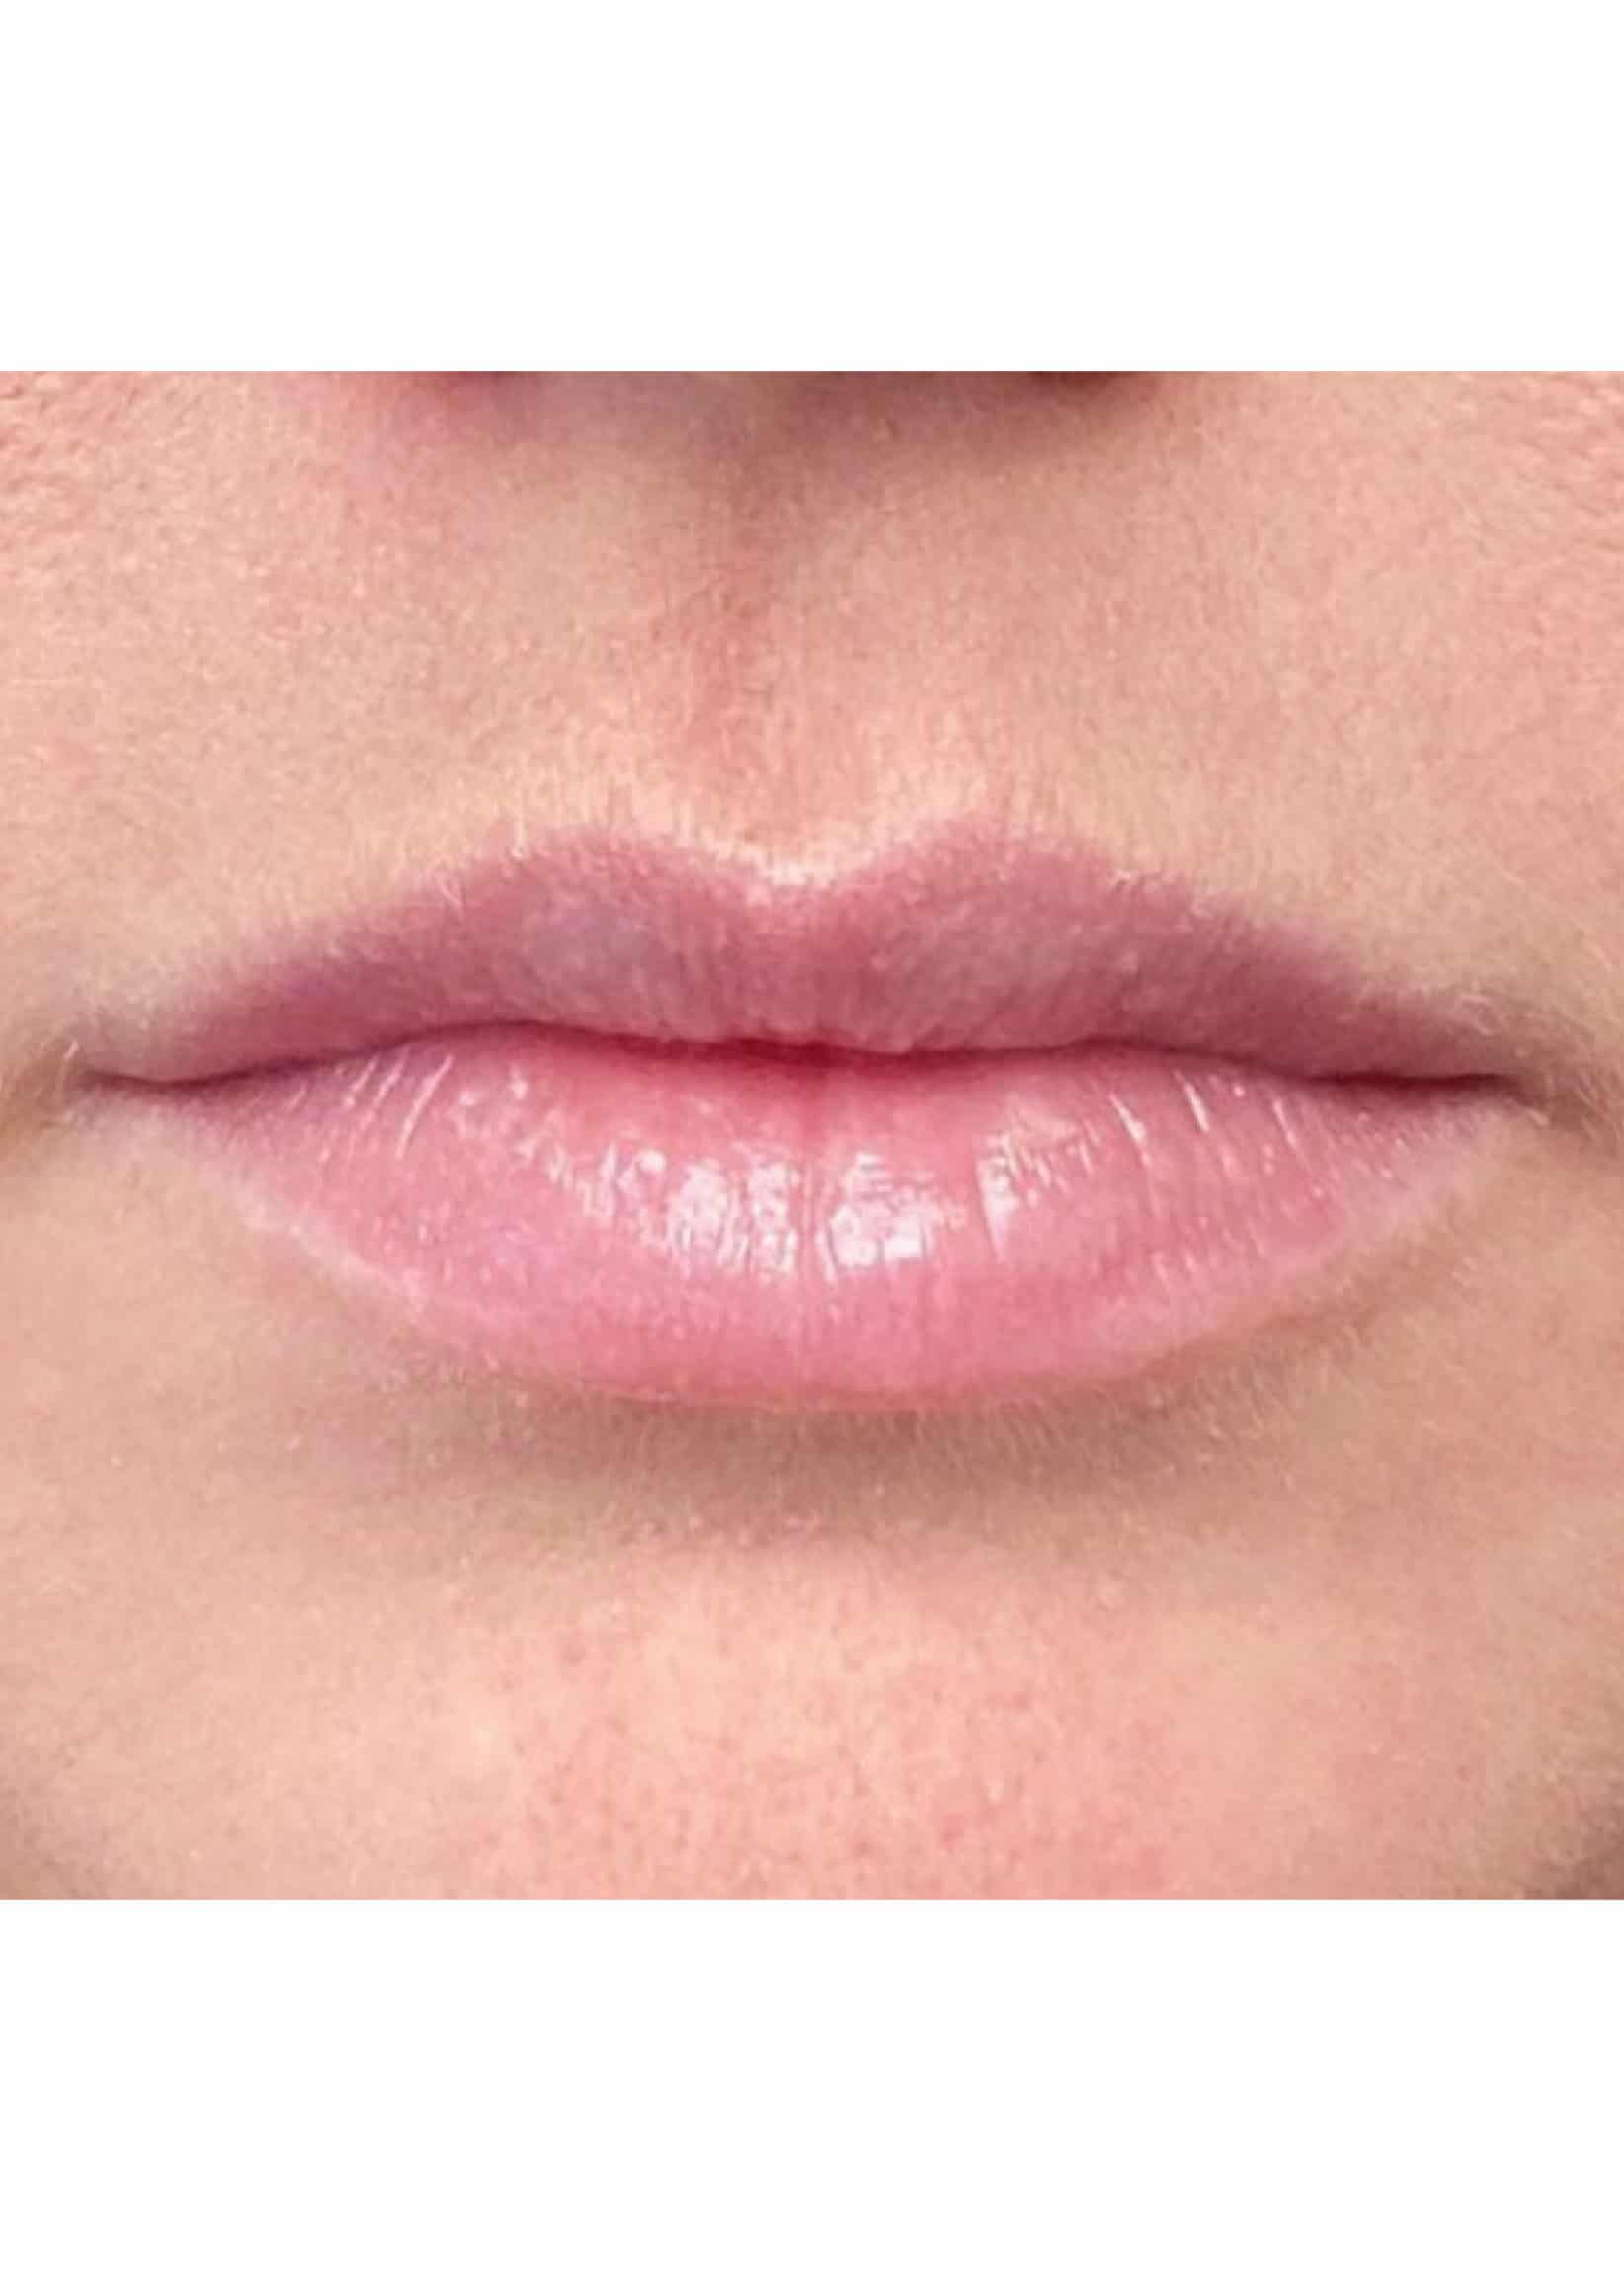 TheSkinCenter ProviderPages JonnaBlum LipFiller Before 6 scaled 1